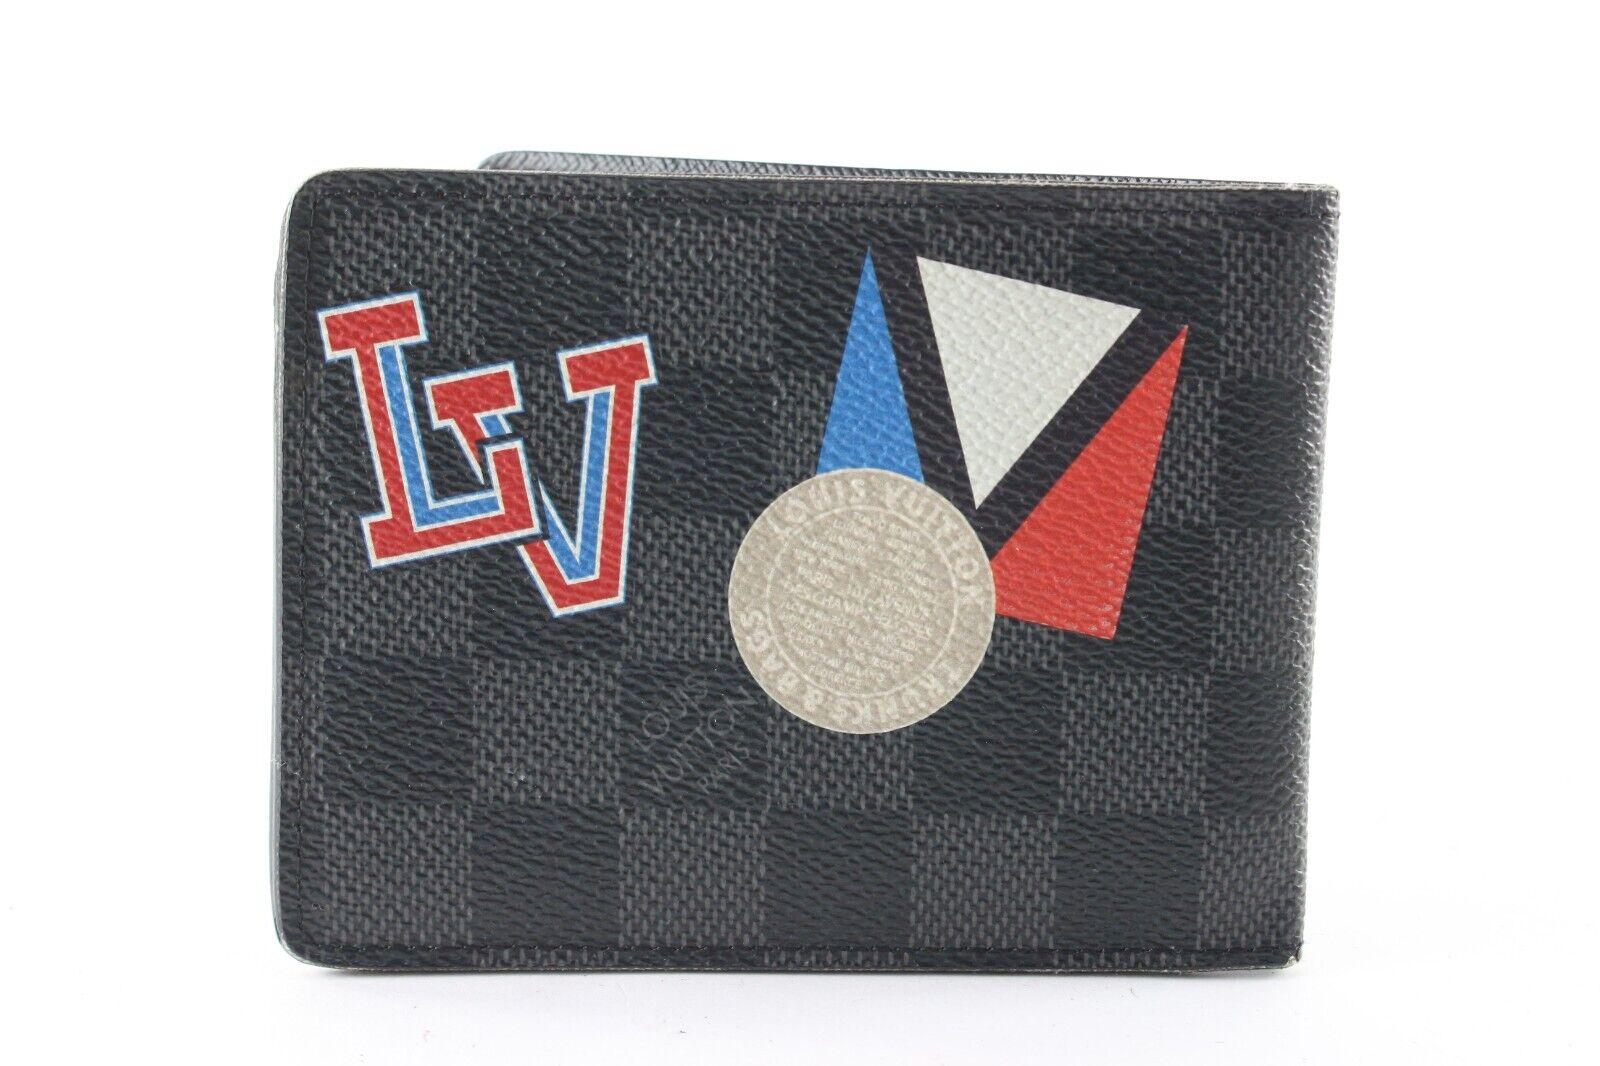 Louis Vuitton DAmier Graphite Patches Story Wallet Marco Florin Slender 2LV629K In Excellent Condition For Sale In Dix hills, NY